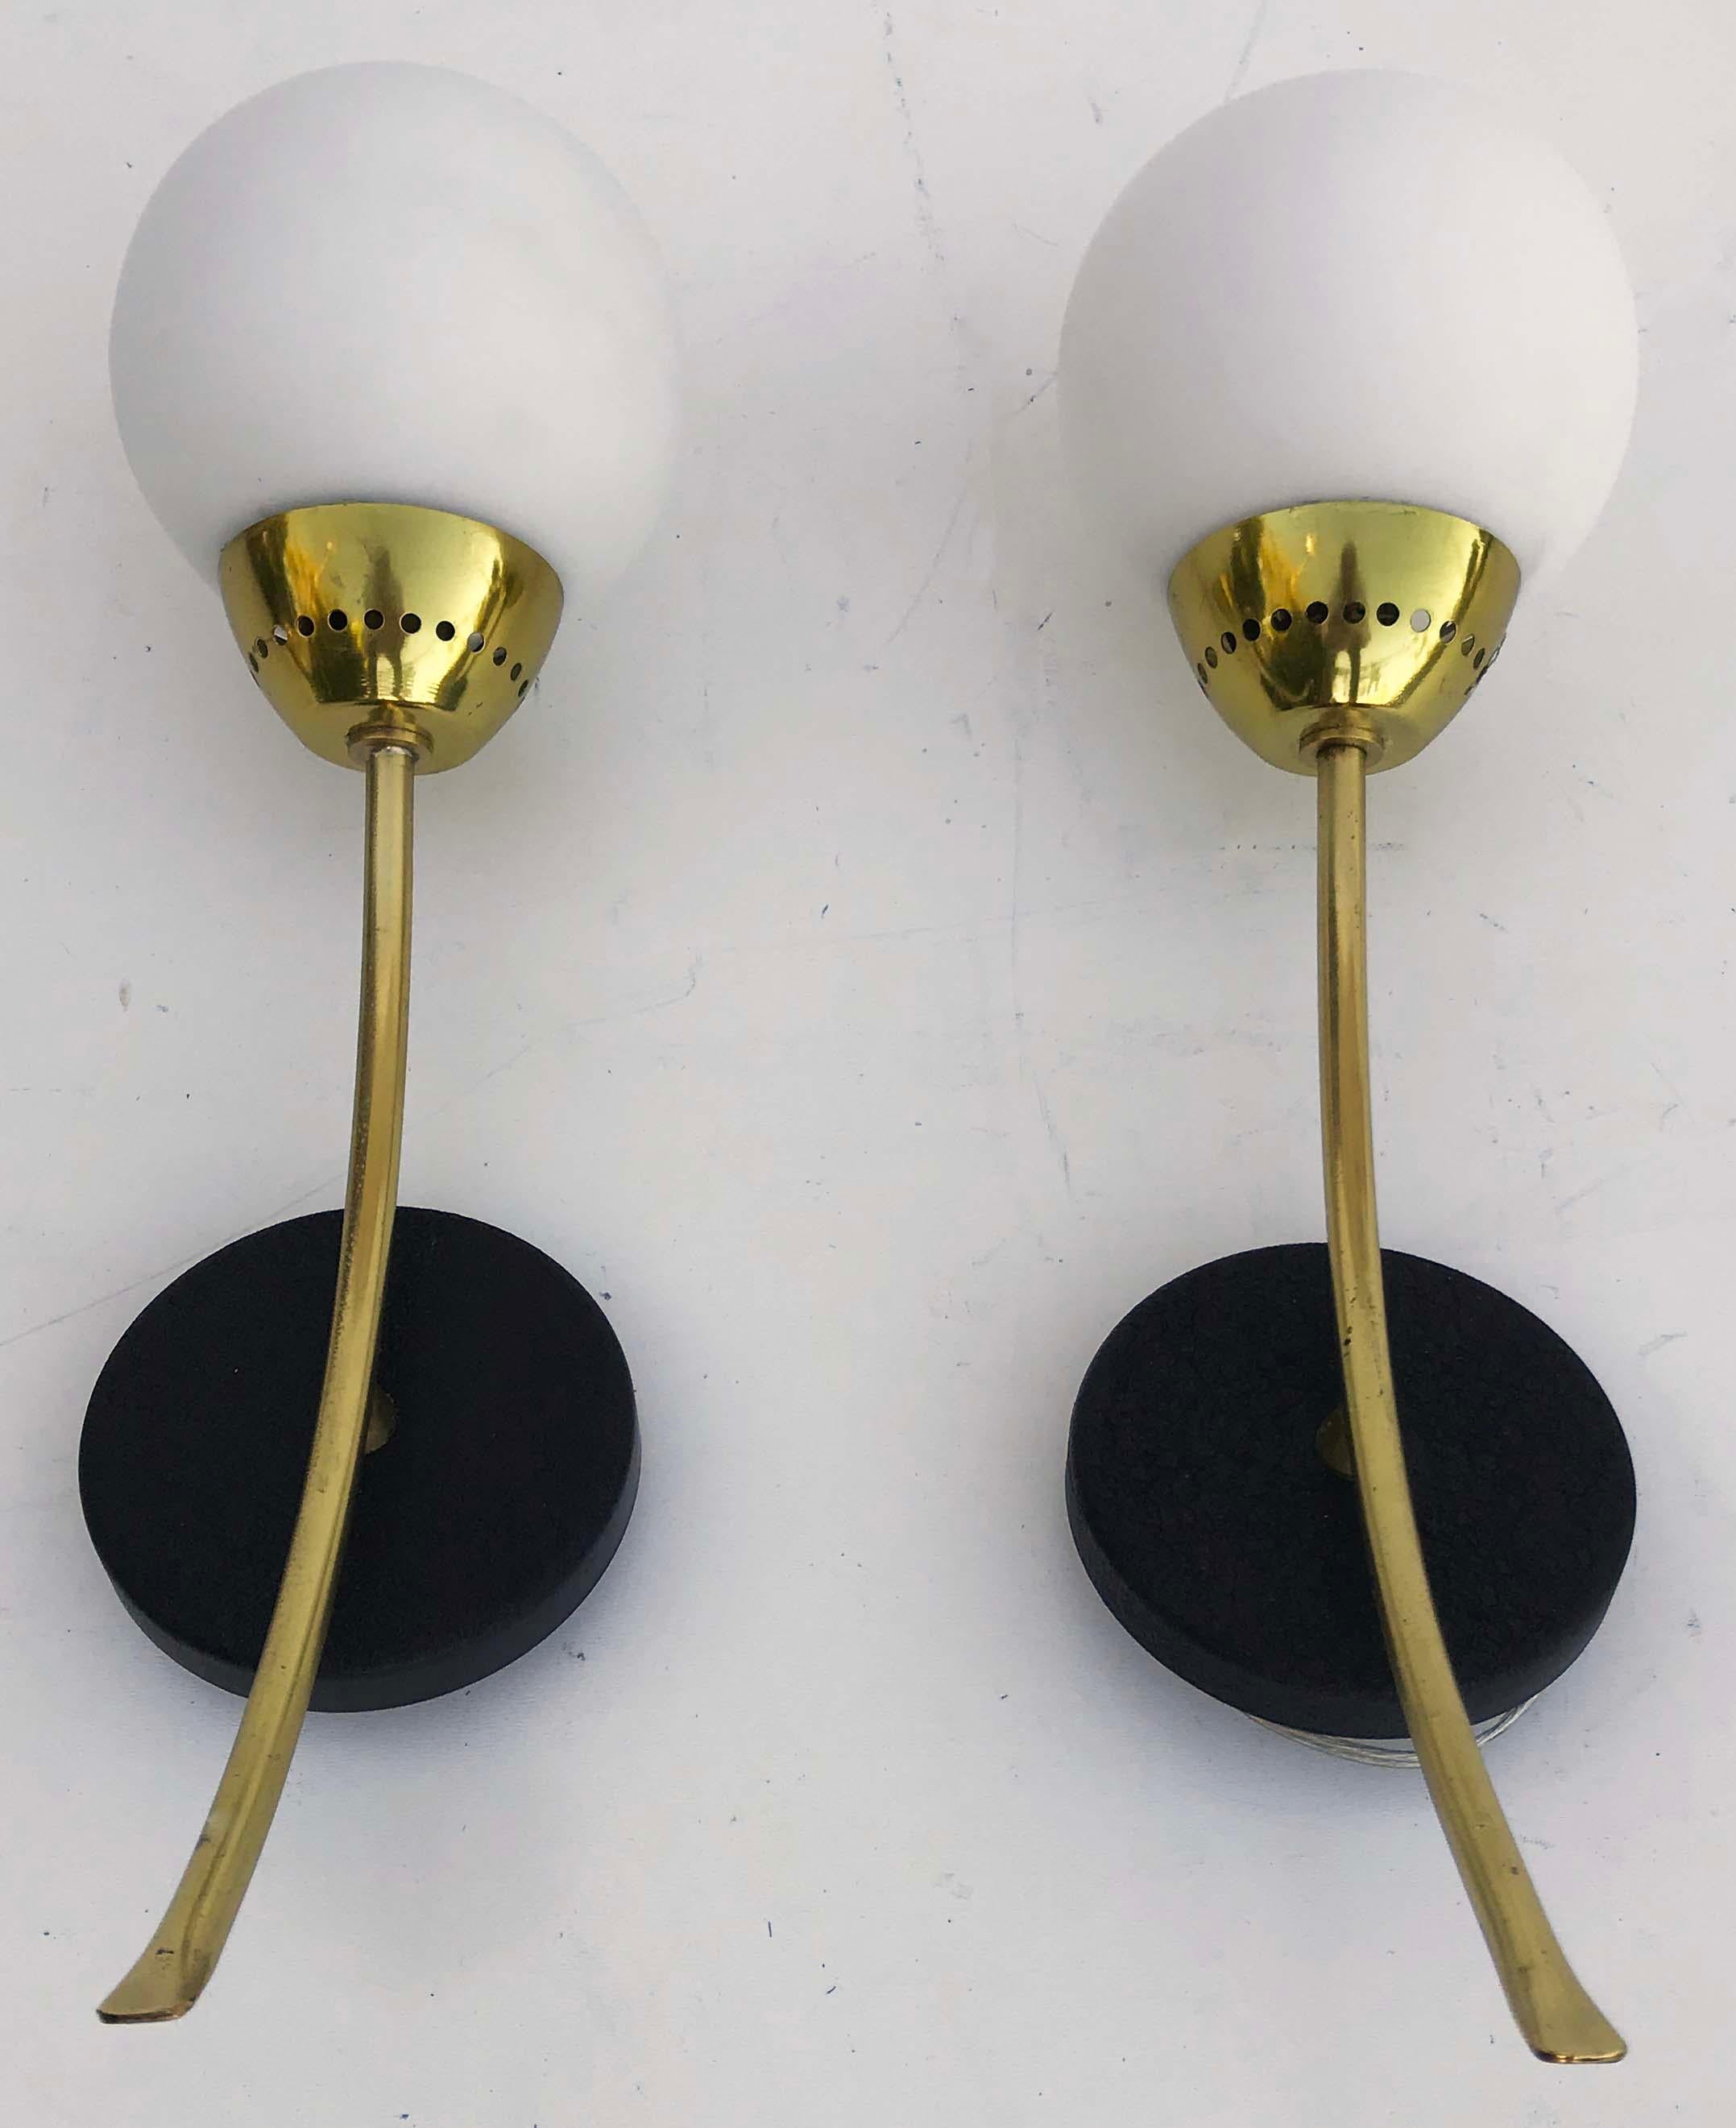 Superb pair of one light Maison Arlus sconces, opaline globe gives a very nice light.
US rewired and in working condition.
25 watts max bulb.
Have a look on our the largest collection of French and Italian period sconces. More than 200